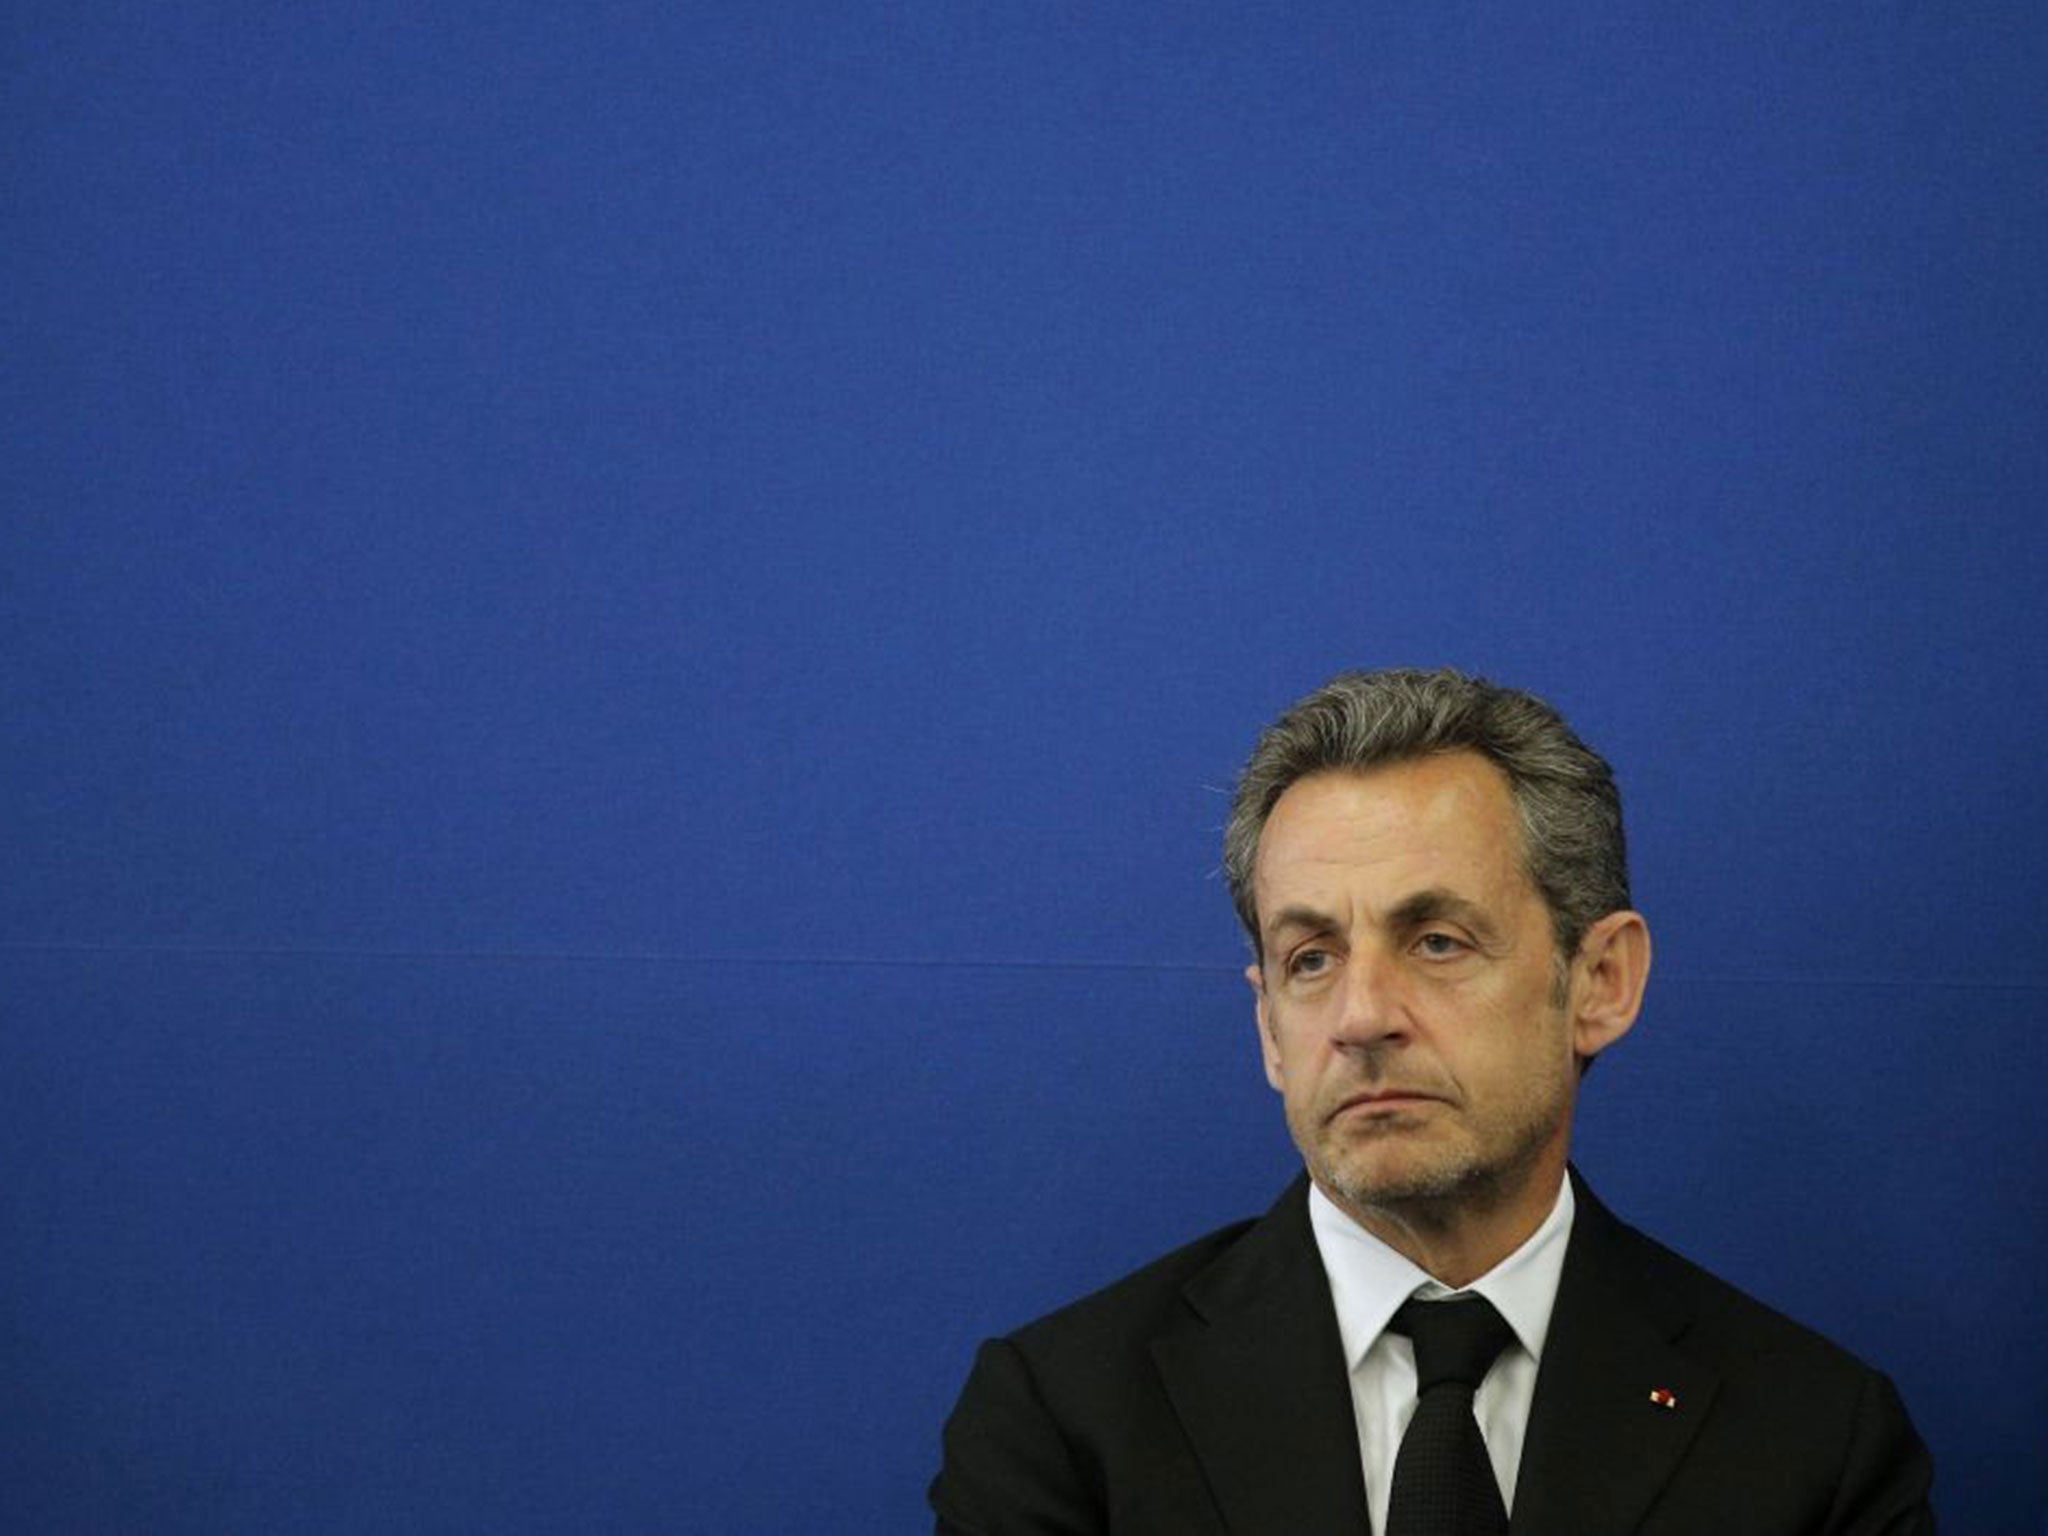 Sarkozy indignantly defended his “honour” earlier this month